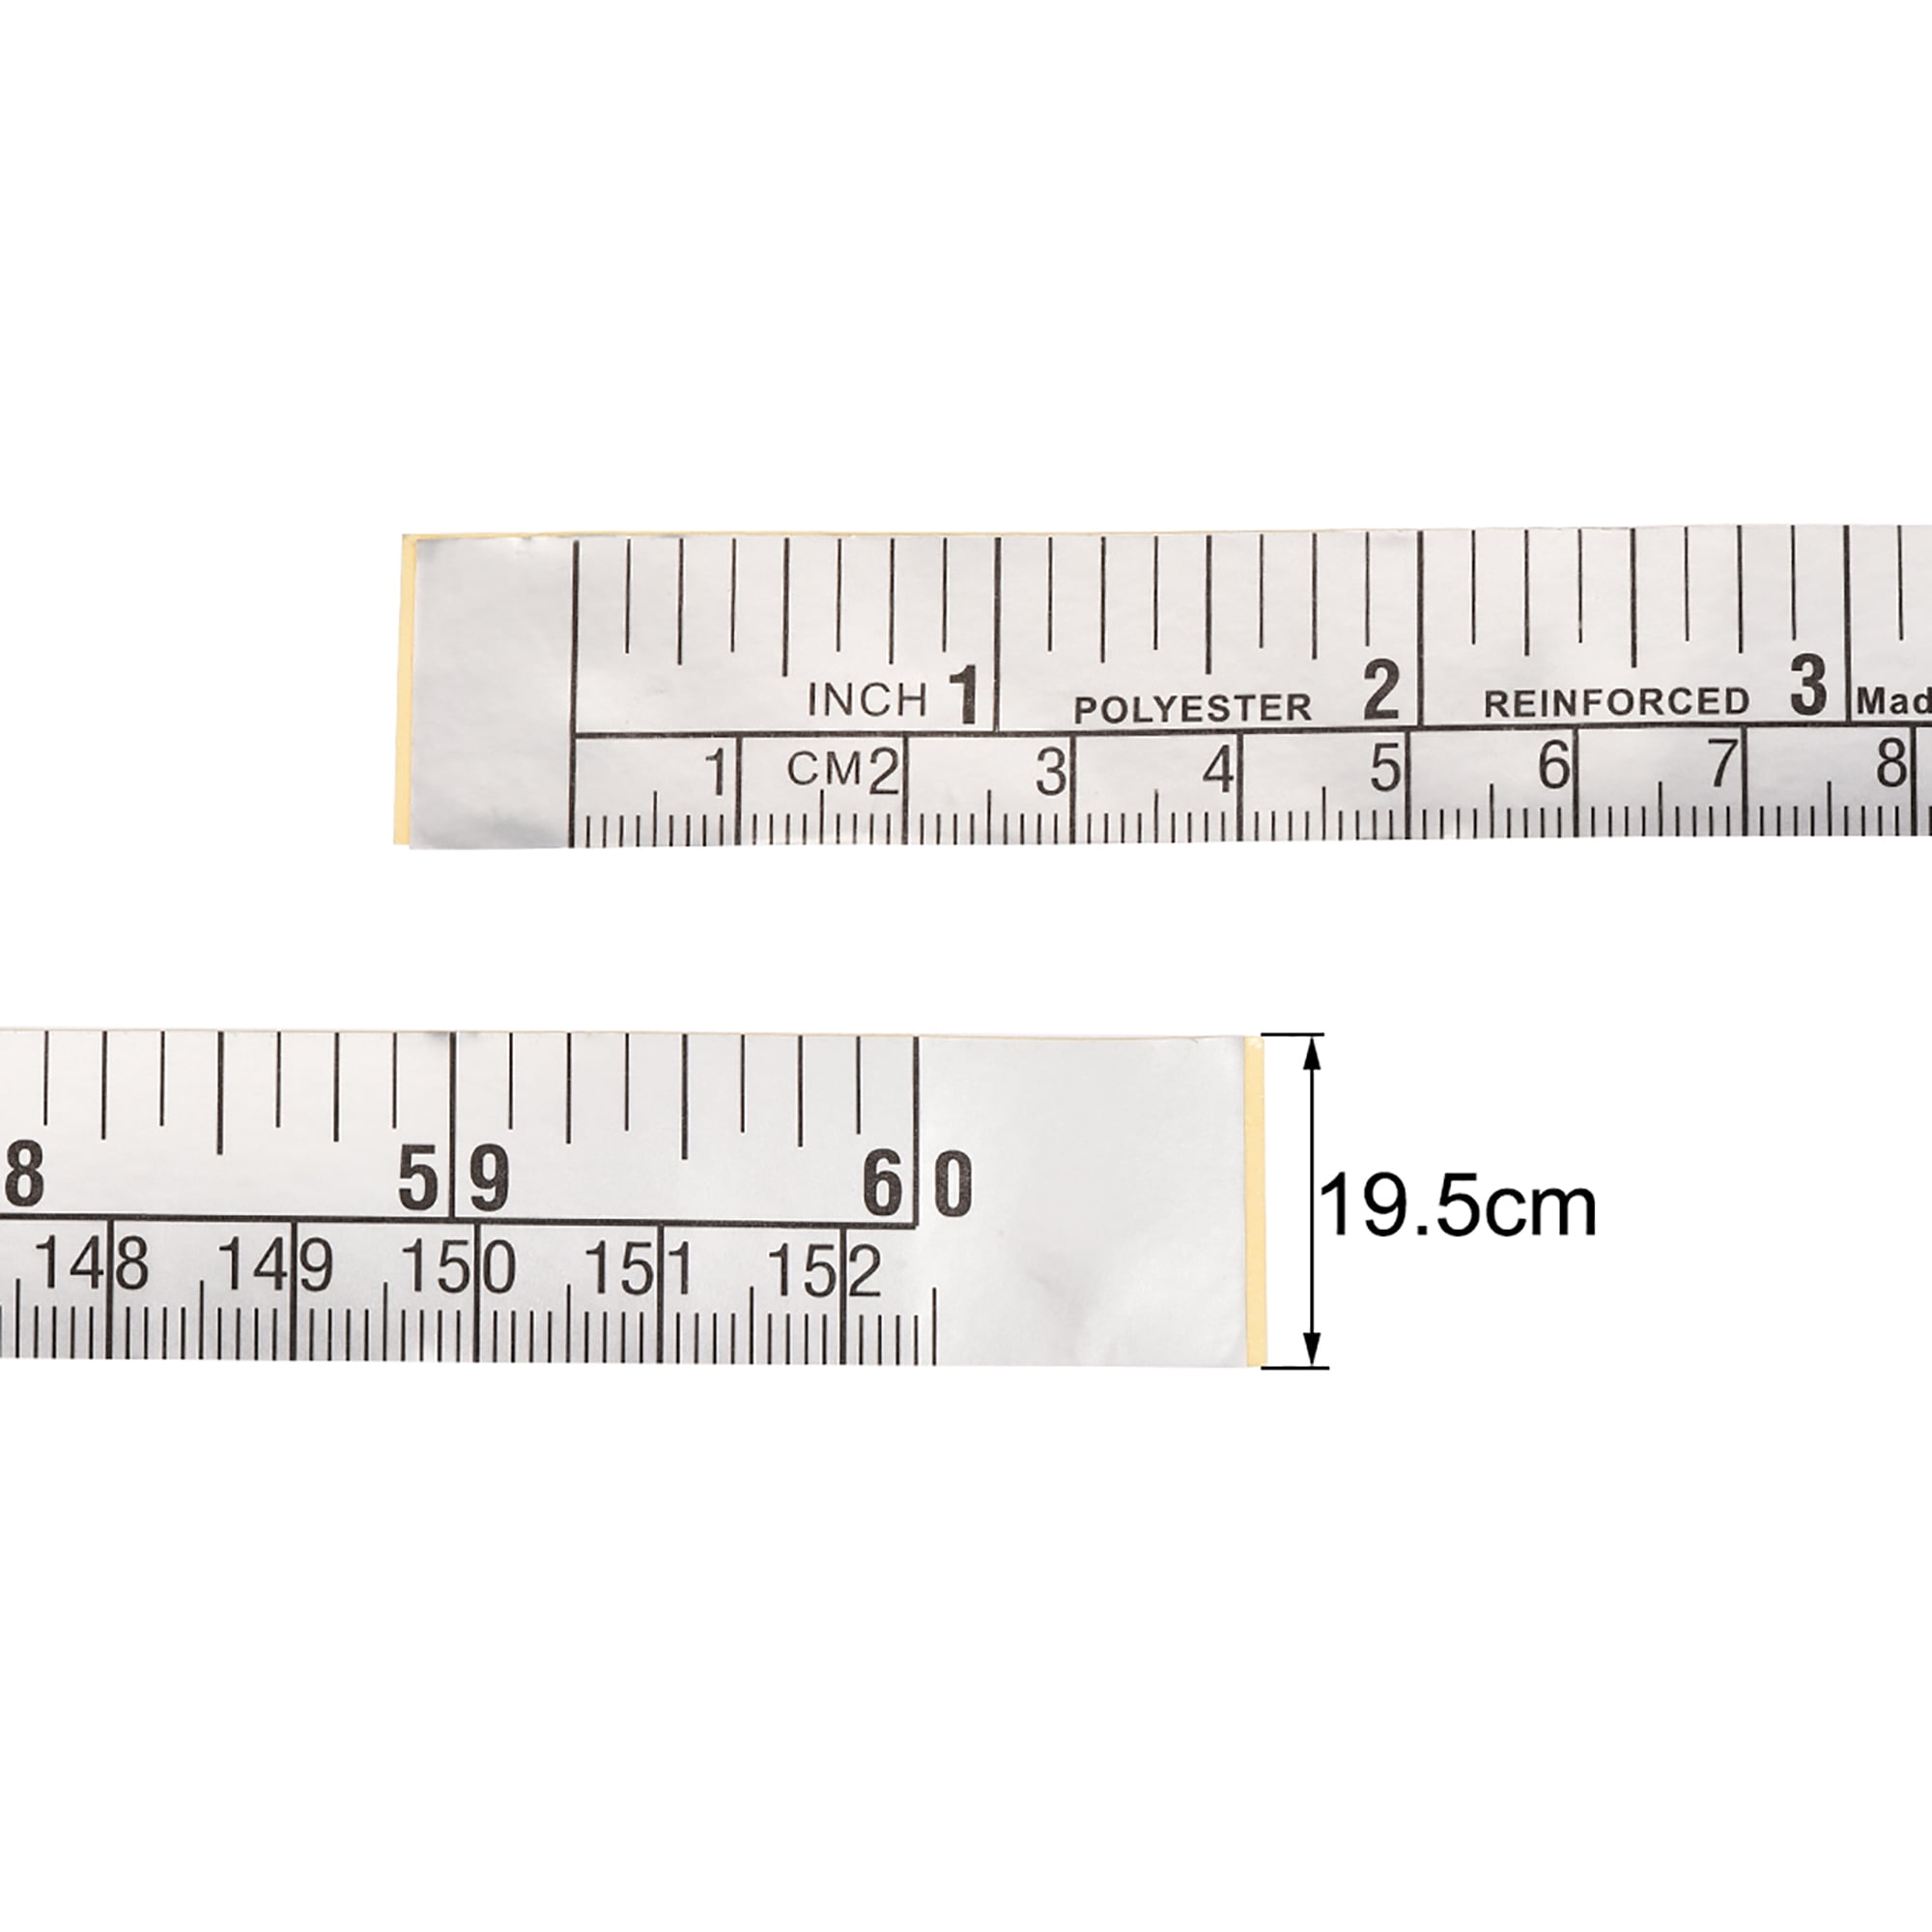 A tape measure or measuring tape is a flexible ruler used to measure size  or distance thickness, length and widths Stock Photo - Alamy